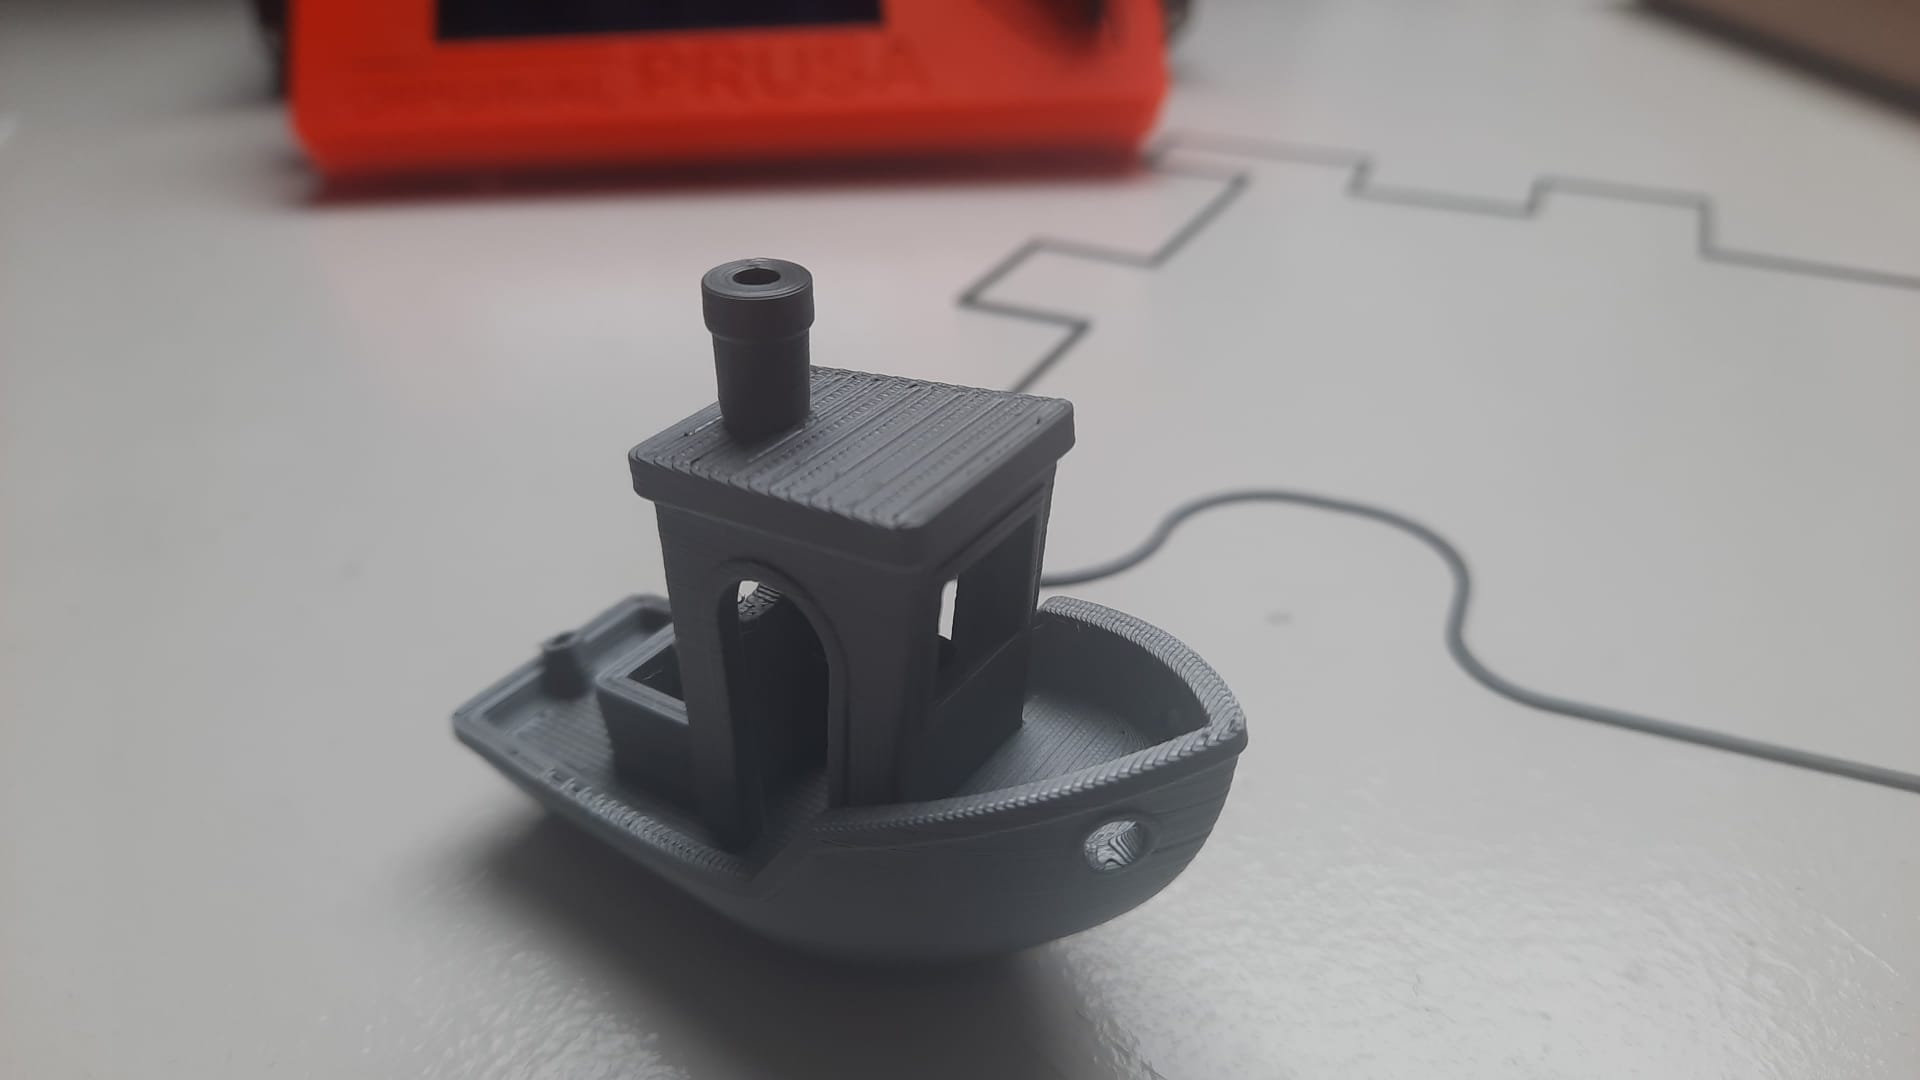 Multiple first prints